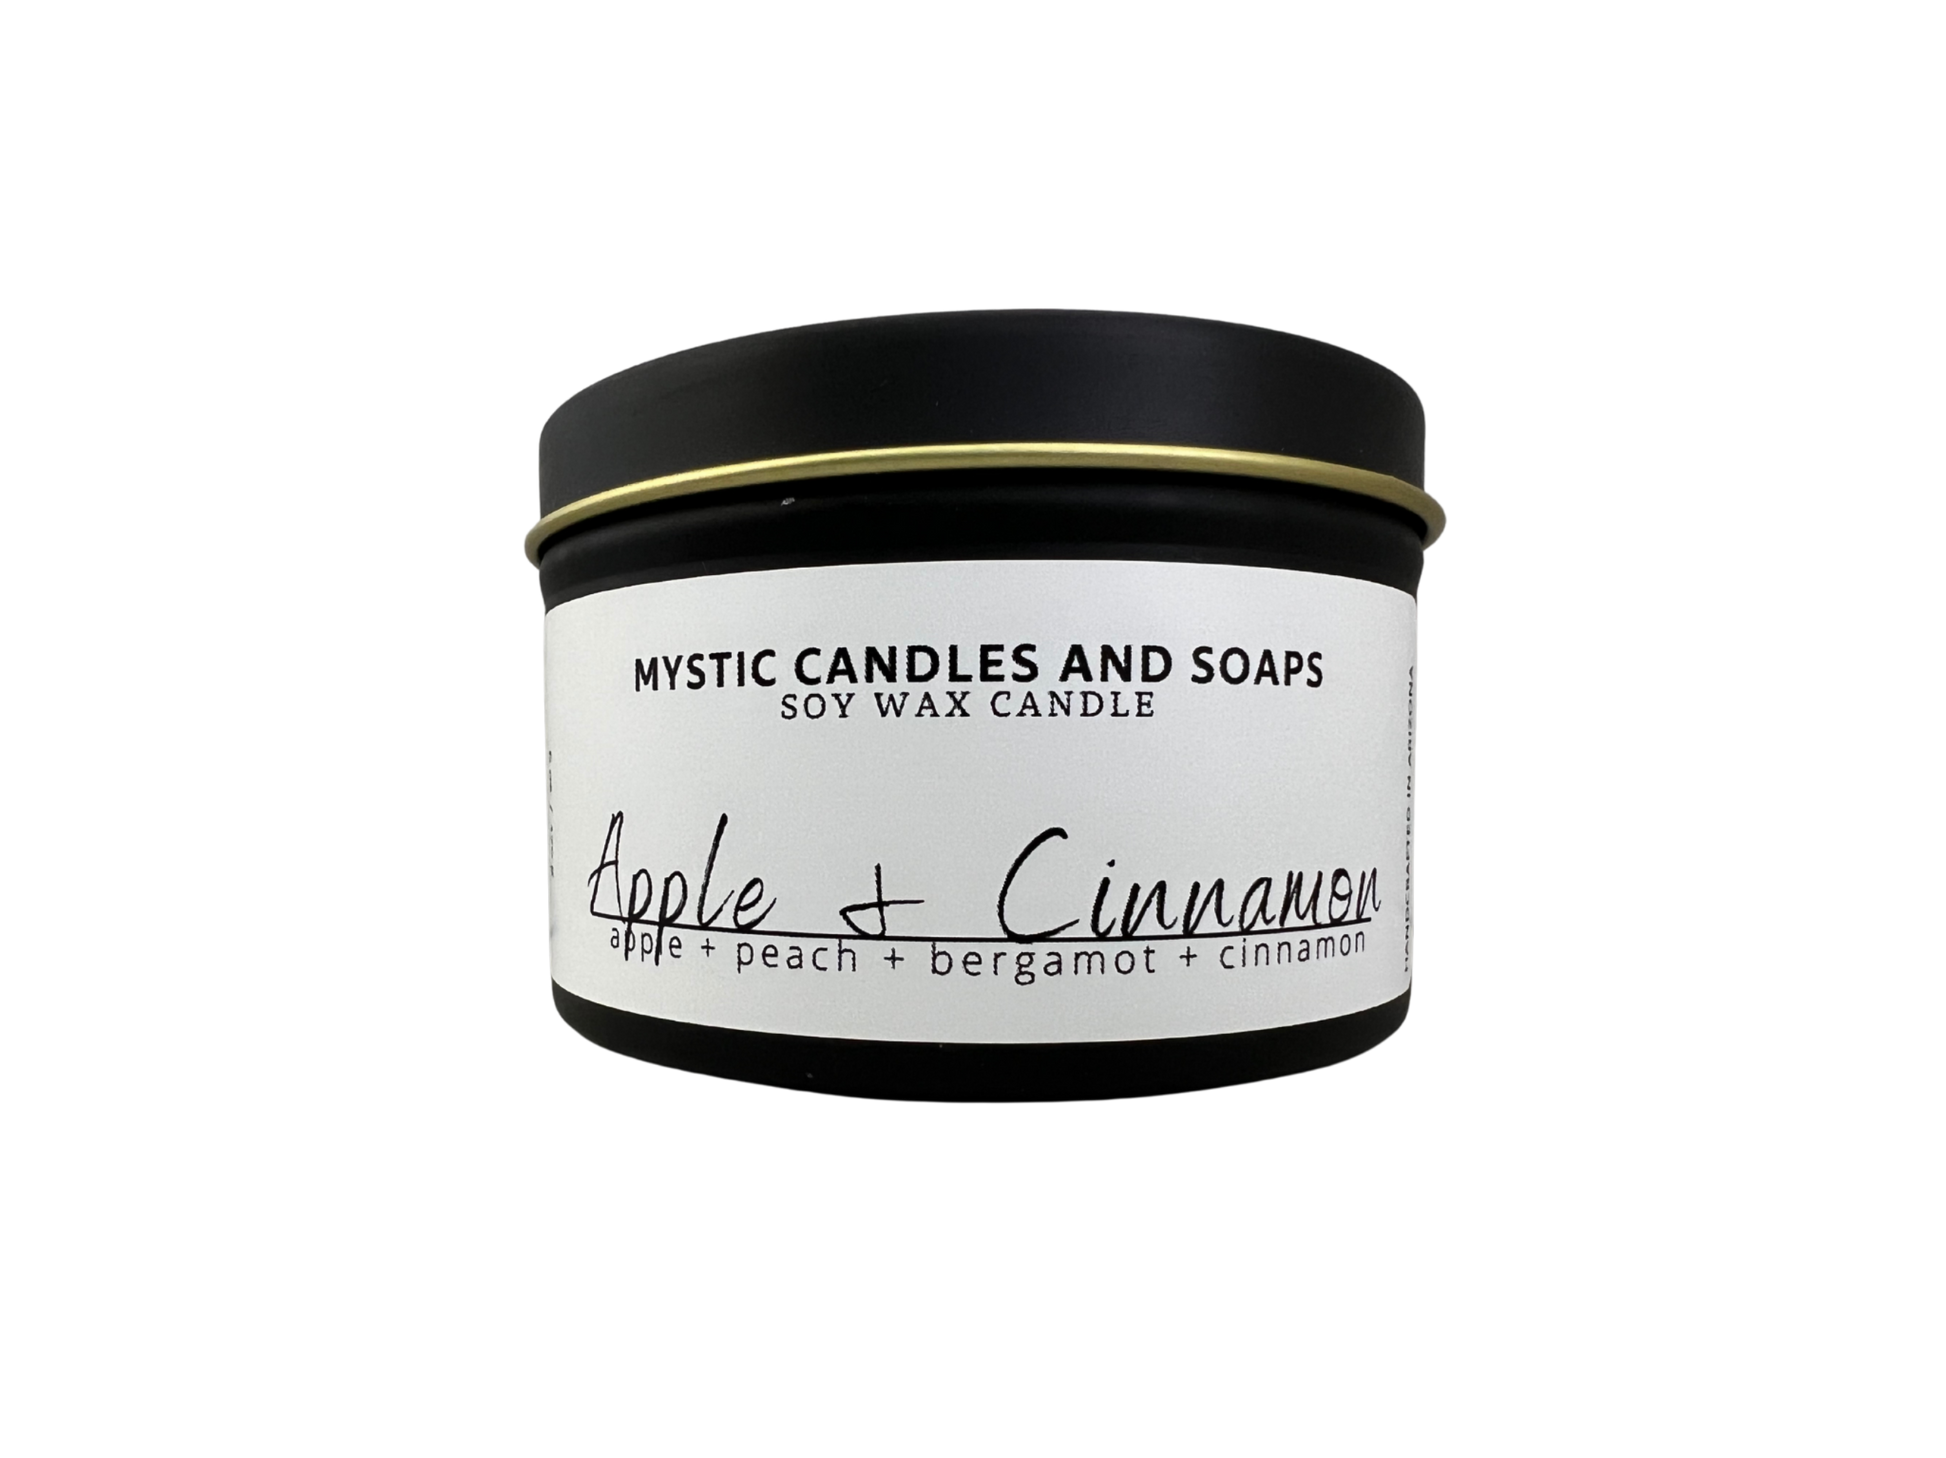 Apple & Cinnamon Flameless 8 oz tin Candle - Mystic Candles and Soaps LLC